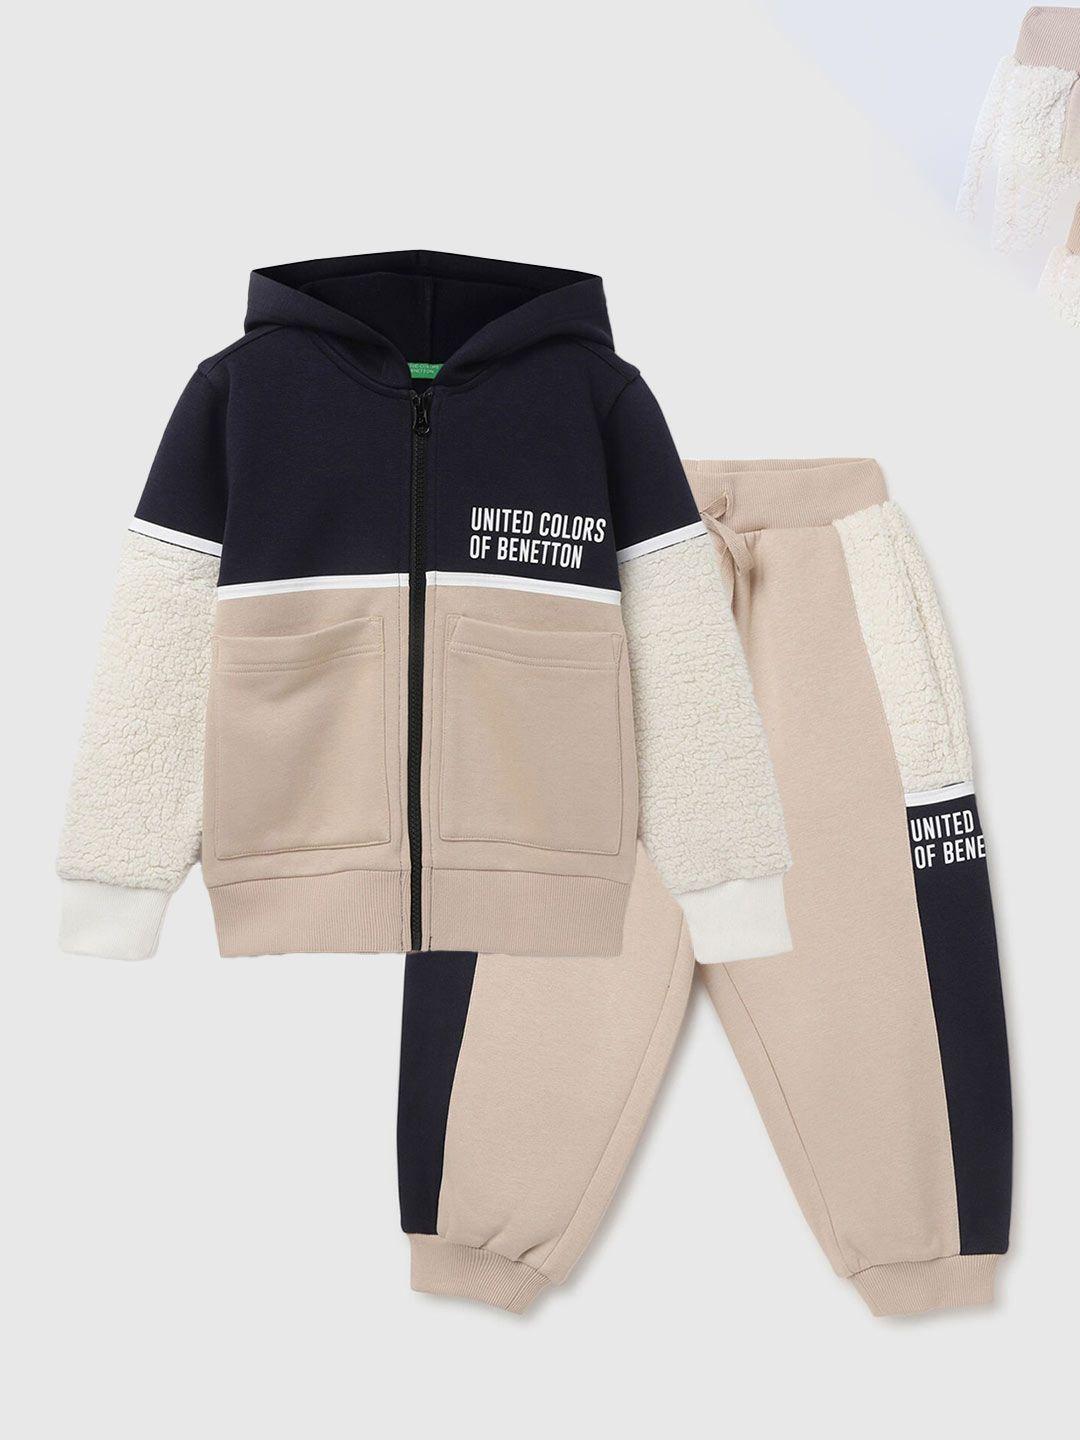 united colors of benetton boys colourblocked hooded sweatshirt and joggers